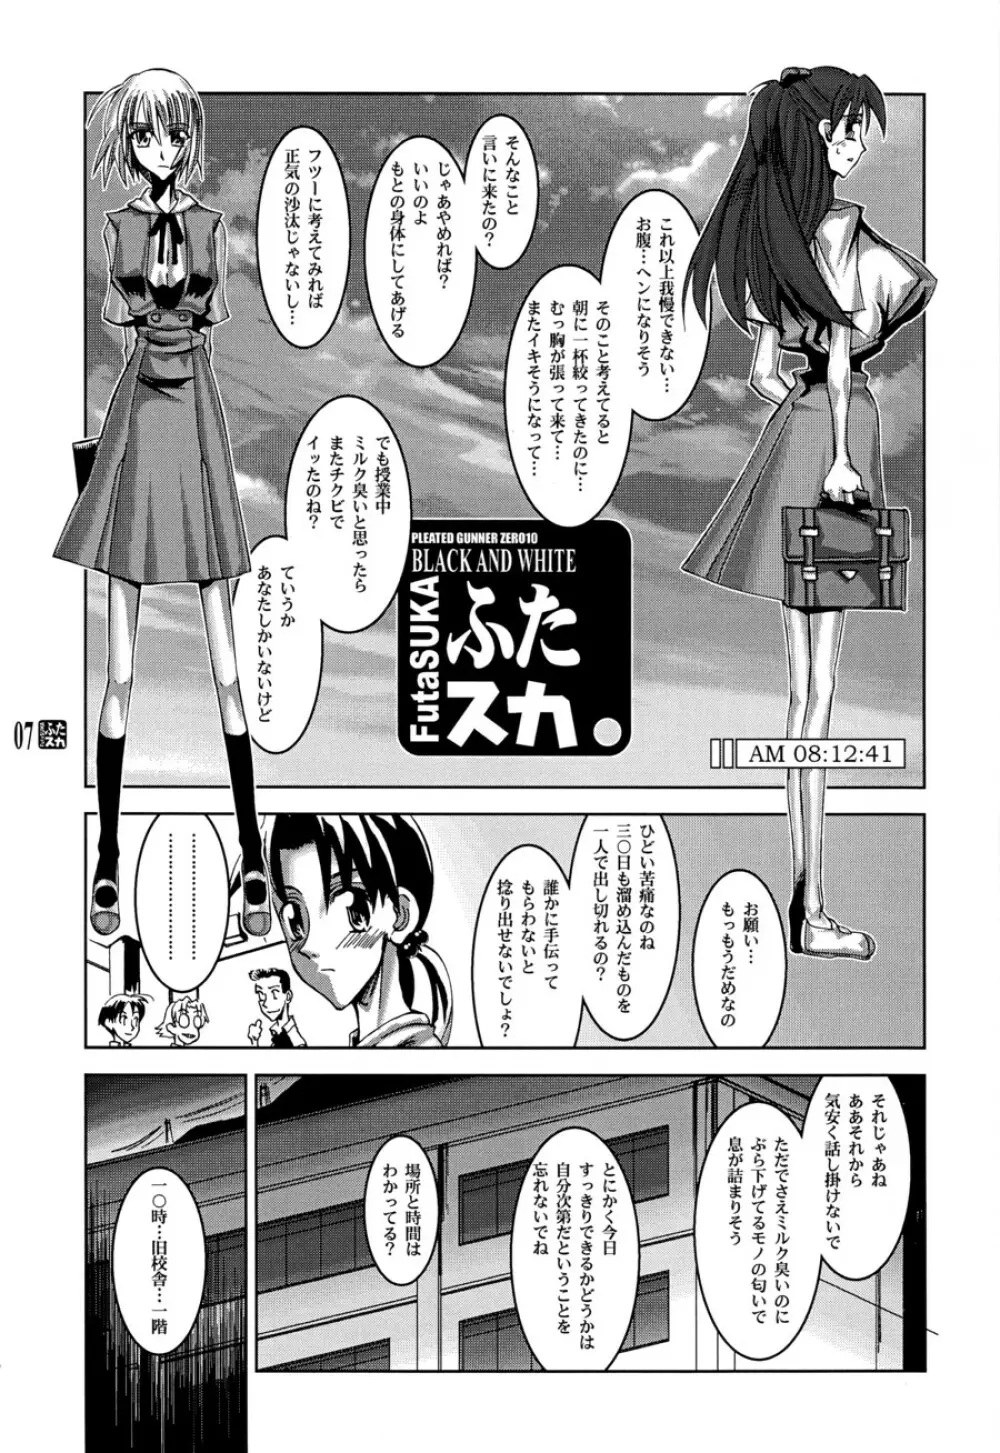 PLEATED GUNNER #10 BLACK AND WHITE ふたスカ - page6